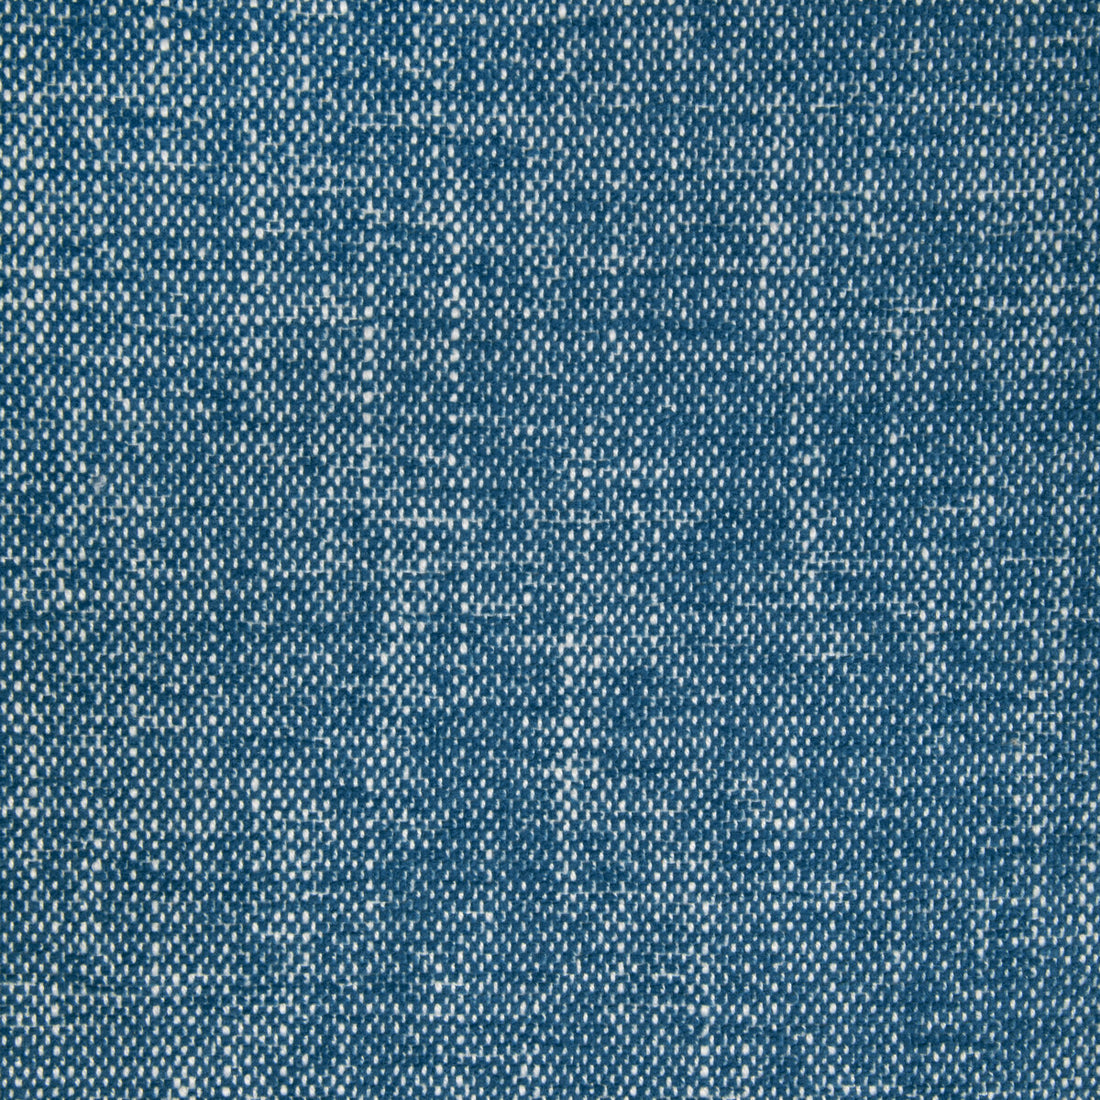 Kravet Smart-36885 fabric in 505 color - pattern 36885.505.0 - by Kravet Smart in the Inside Out Performance Fabrics collection